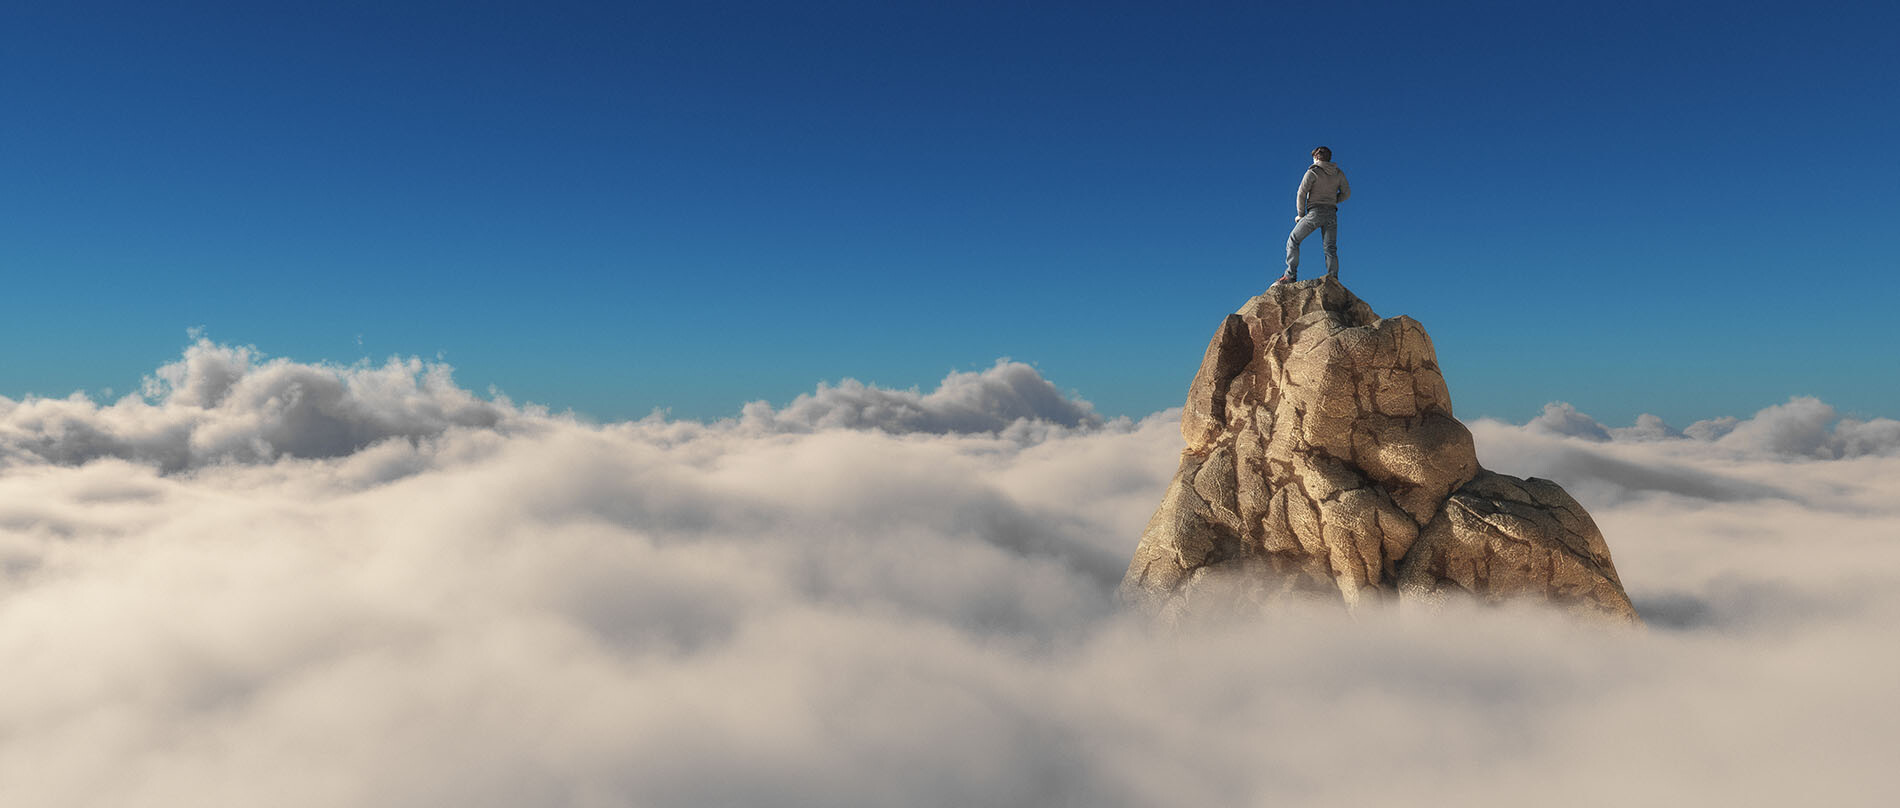 Person standing on mountain peak overlooking clouds